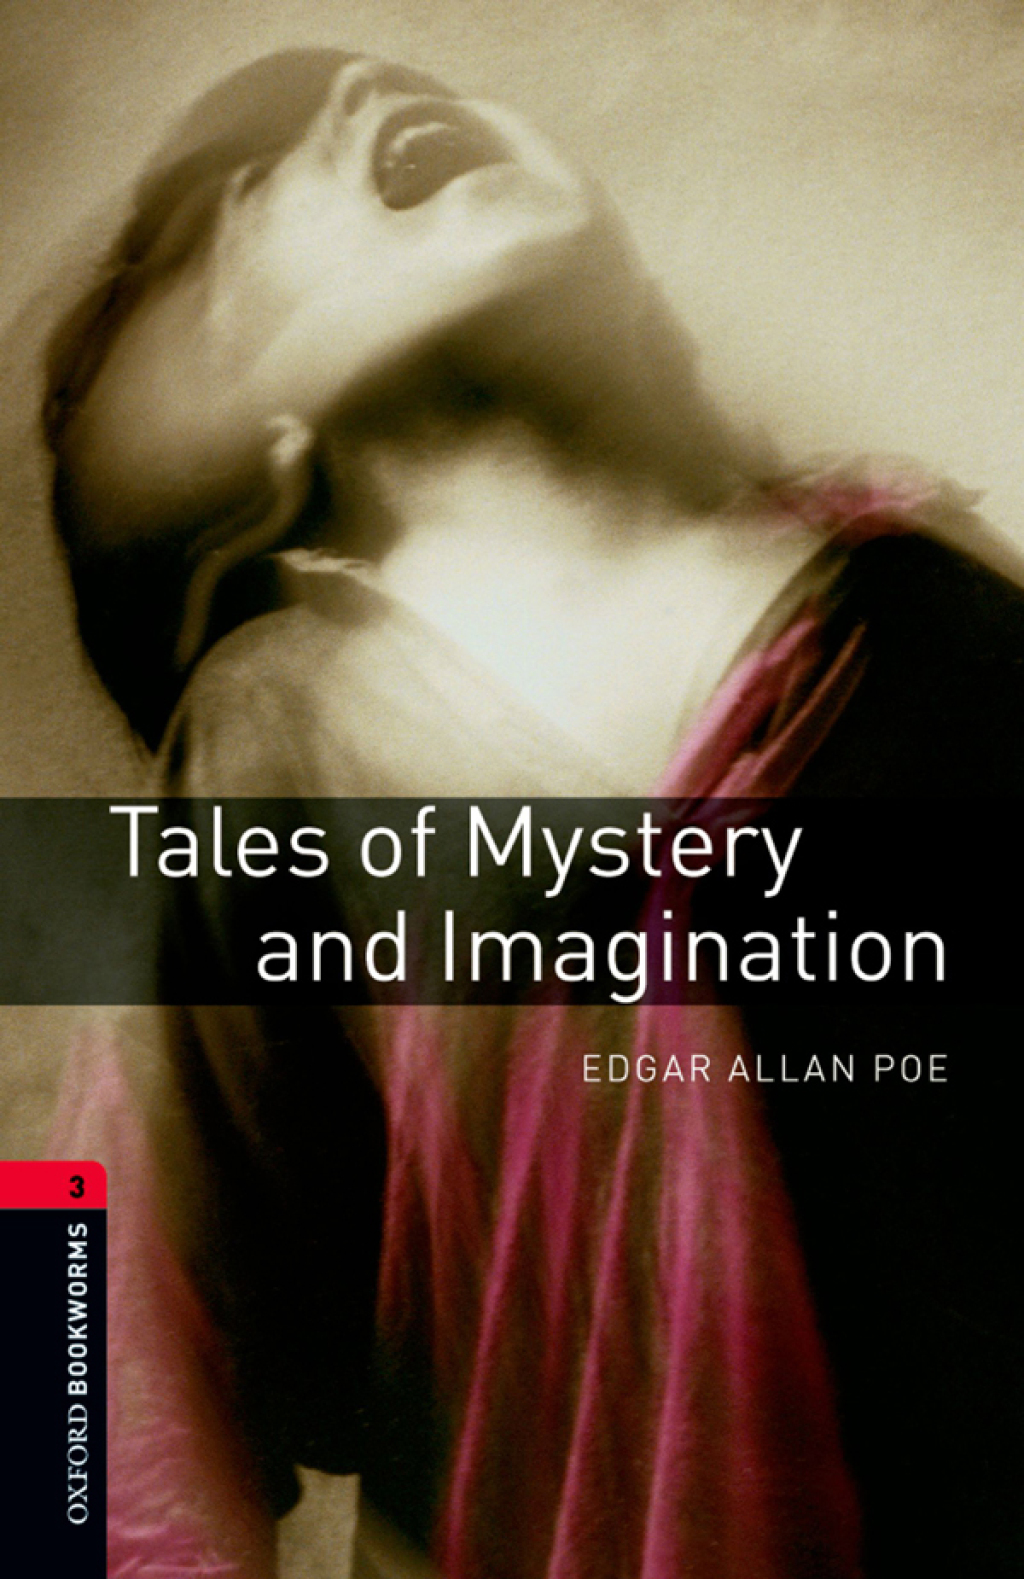 Tales of Mystery and Imagination Level 3 Oxford Bookworms Library - 3rd Edition (eBook Rental)